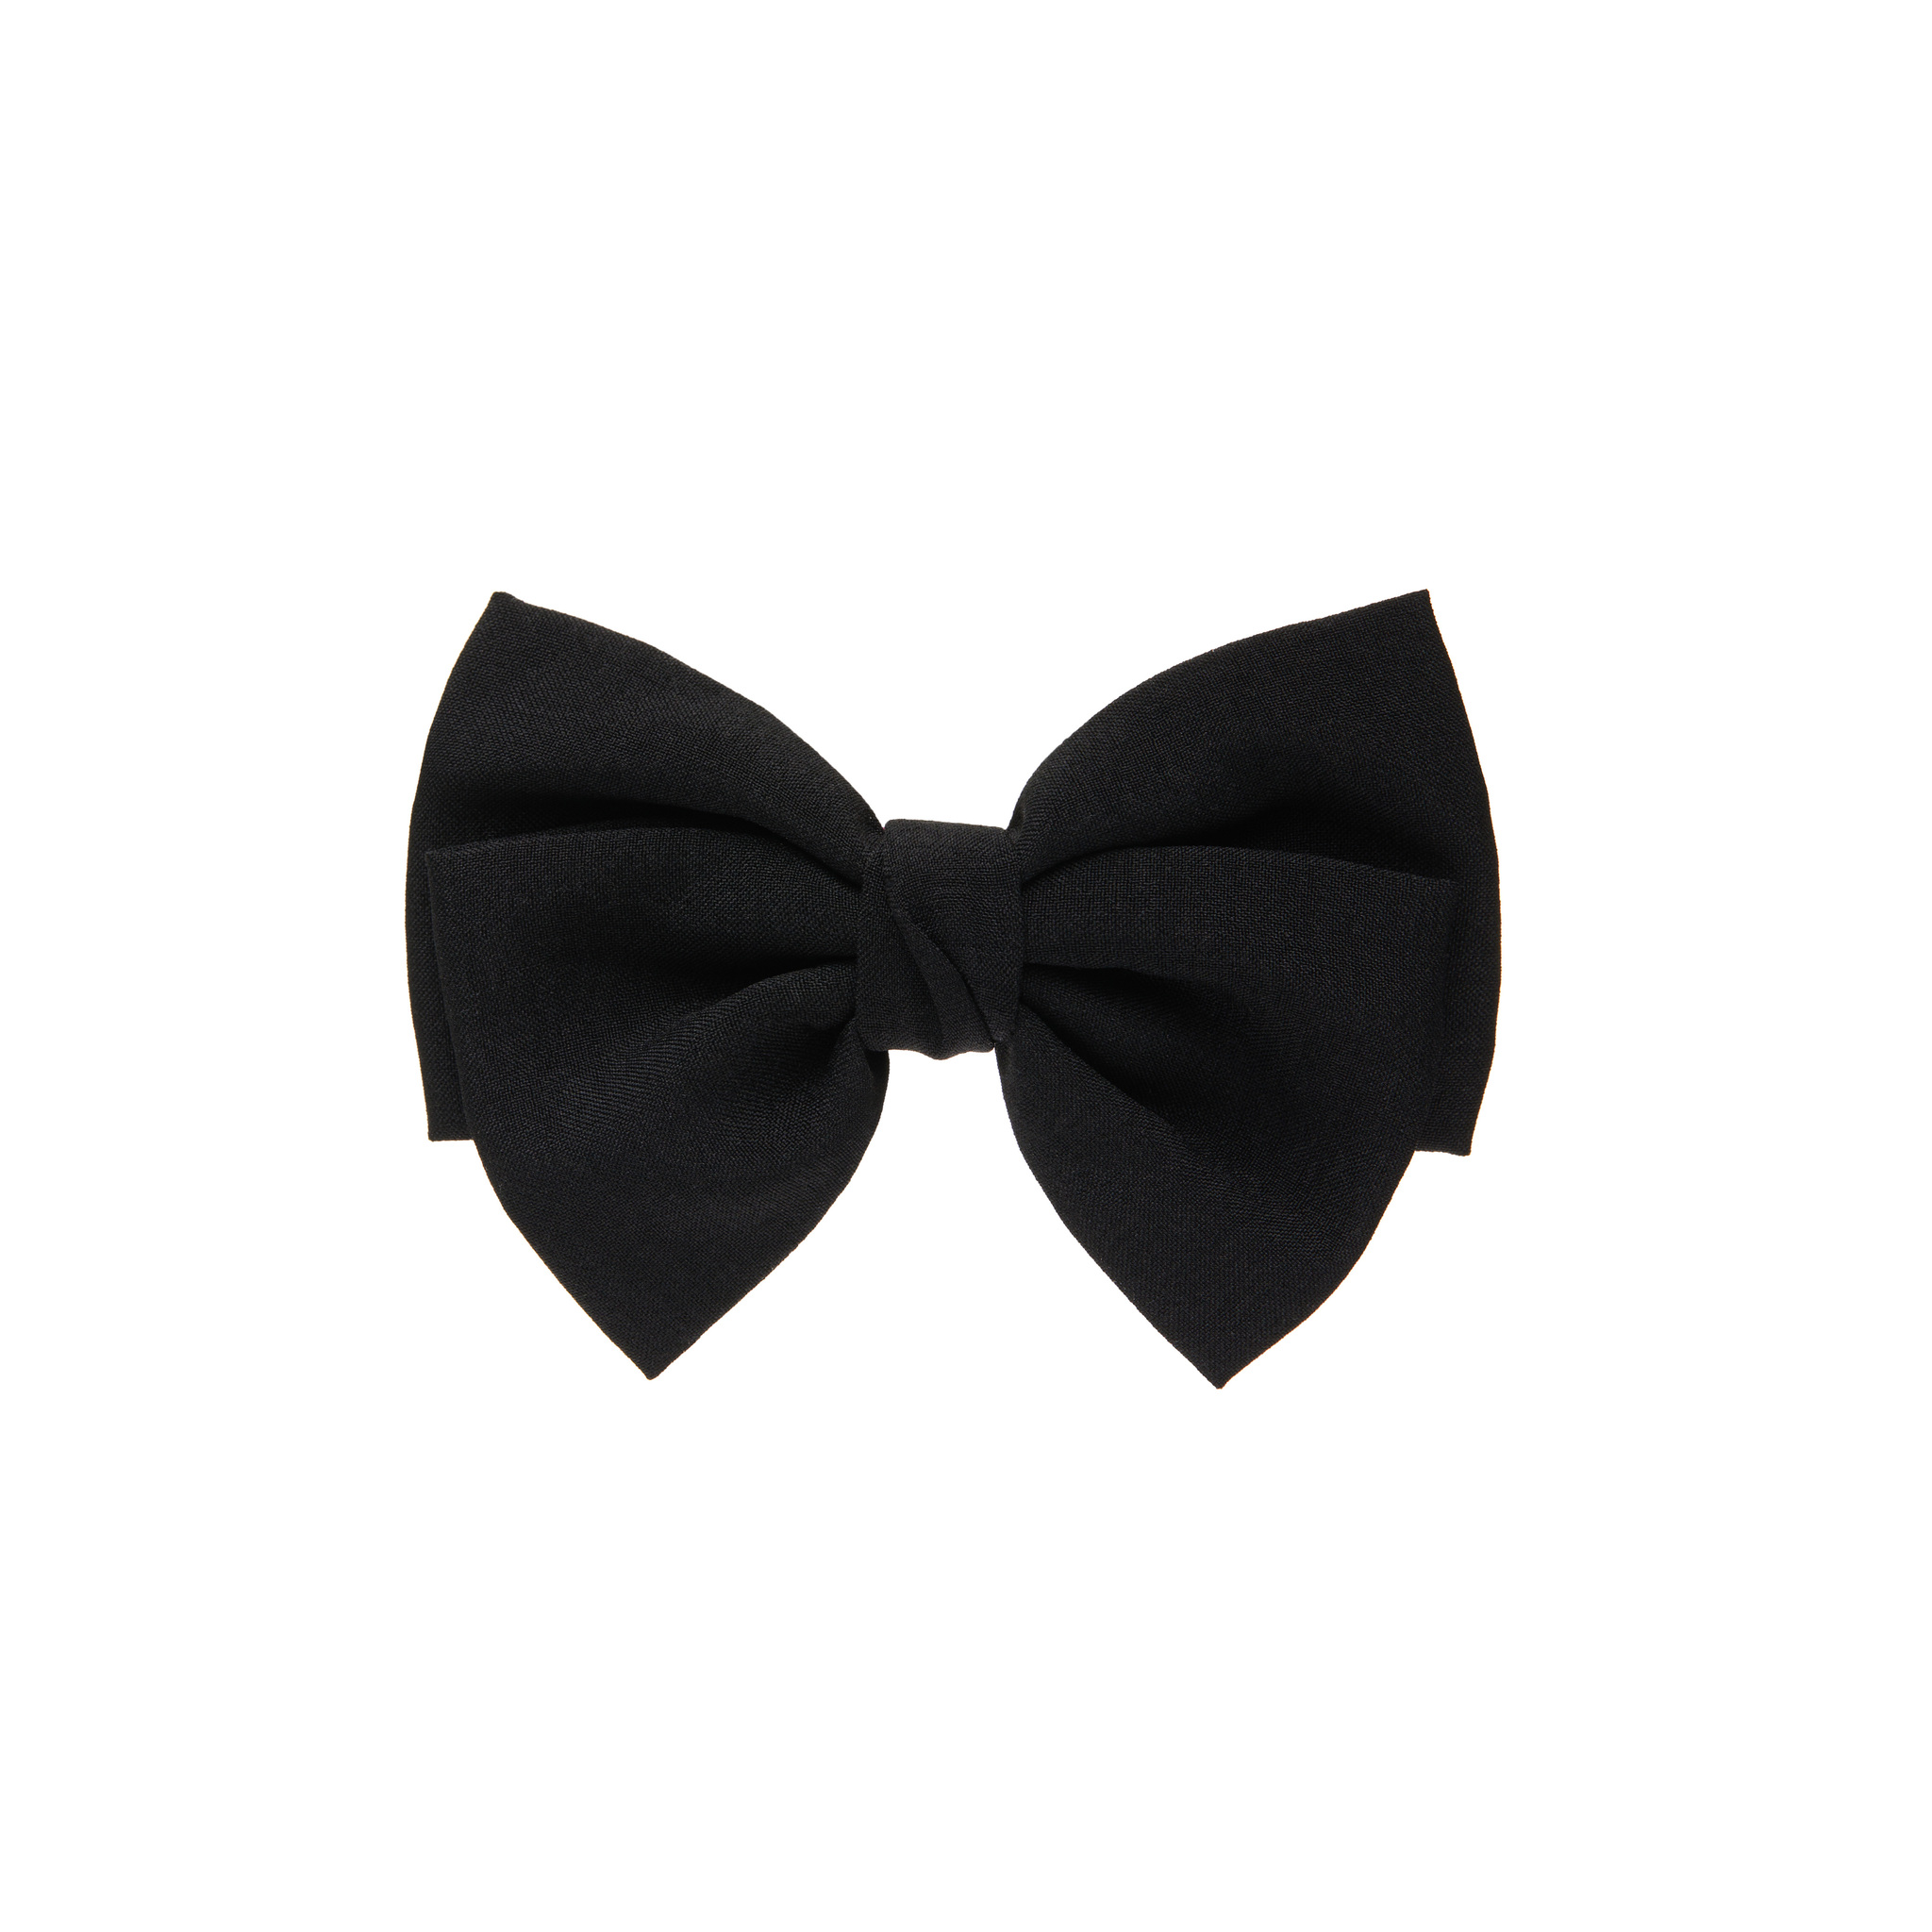 HOLLY JUNE Заколка Bow Hair Clip – Black elegant velvet pearl barrettes bow hair clip bow hairpins vintage women girls black wine red bow hair clip tie prom accessories